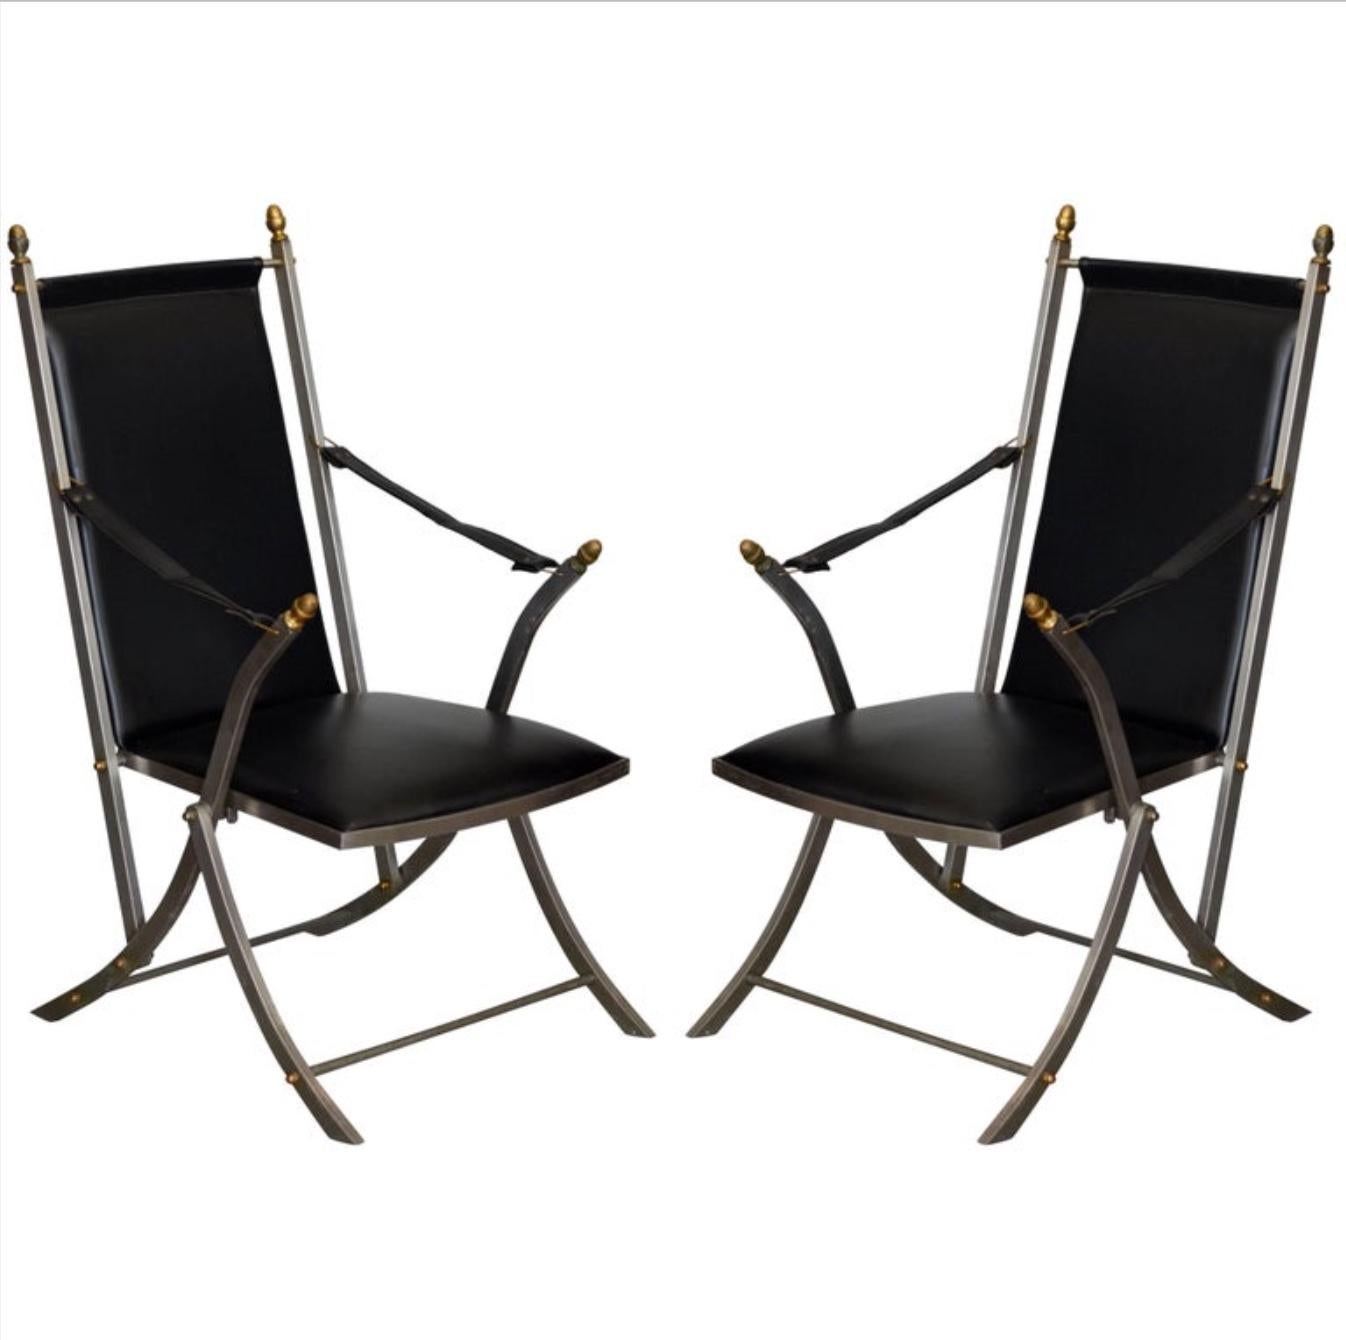 Pair of folding Campaign armchairs in the style of Otto Parzinger for Maison Jansen.